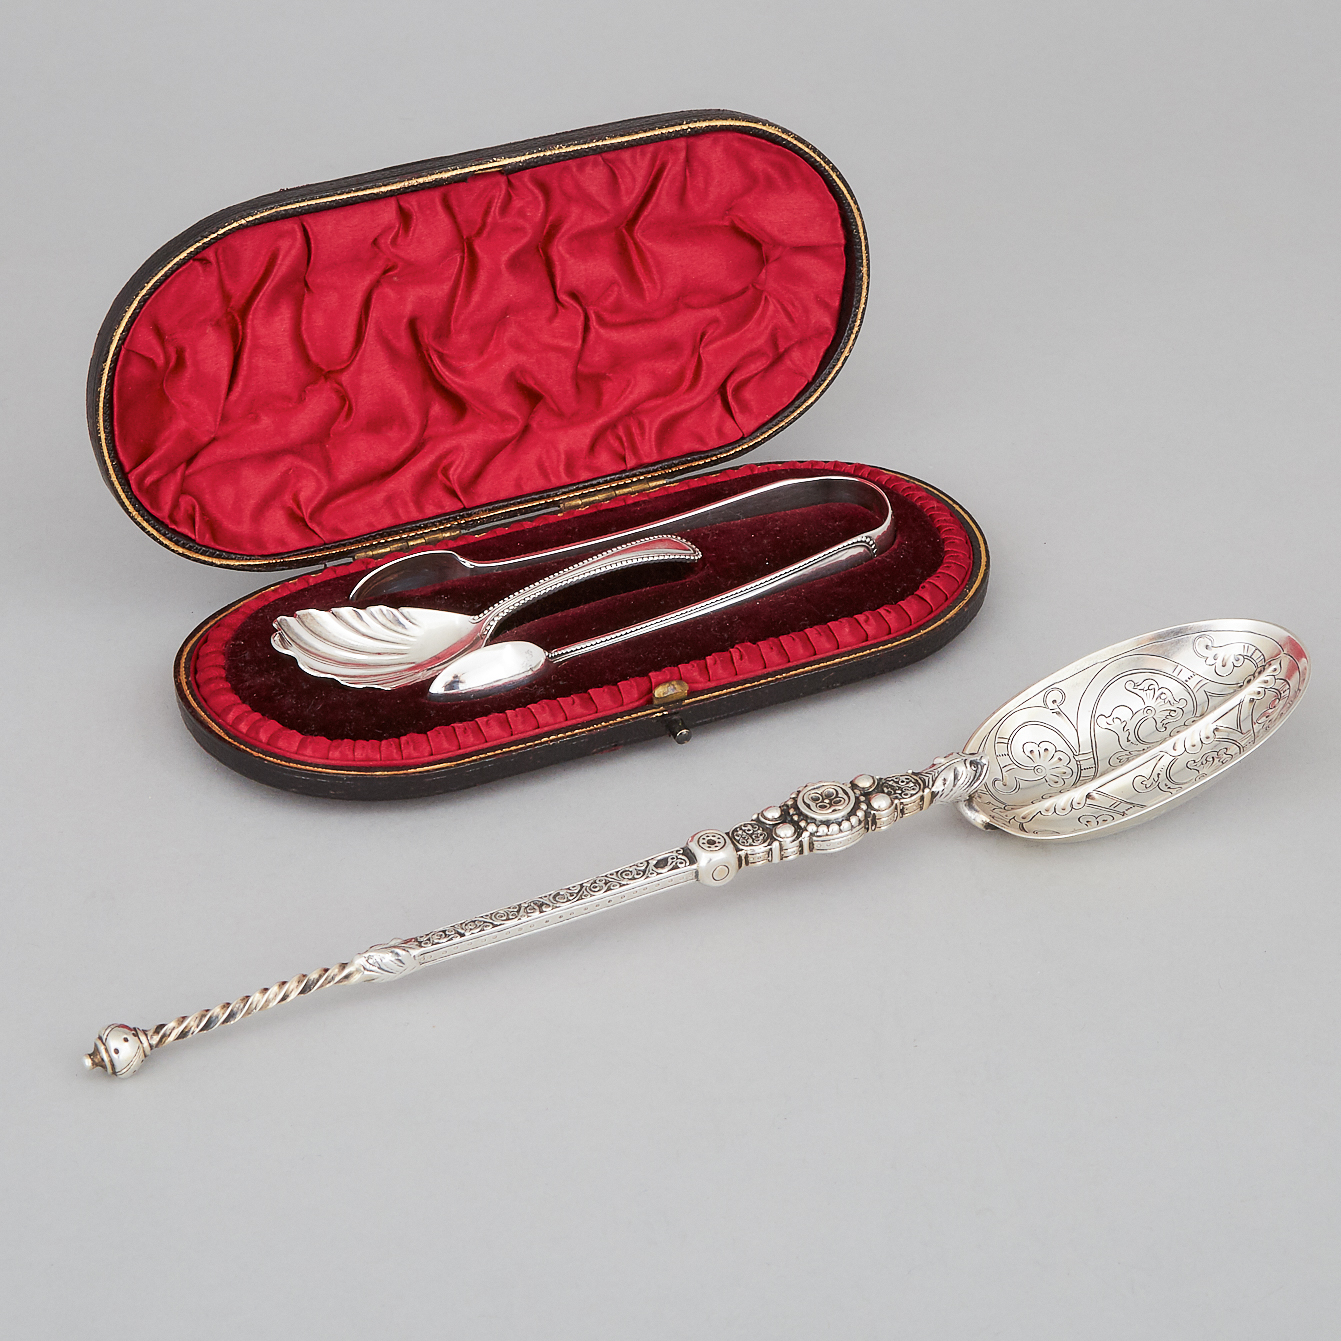 Victorian Silver Anointing Spoon, Caddy Spoon and Sugar Tongs, London, 1876 and 1893